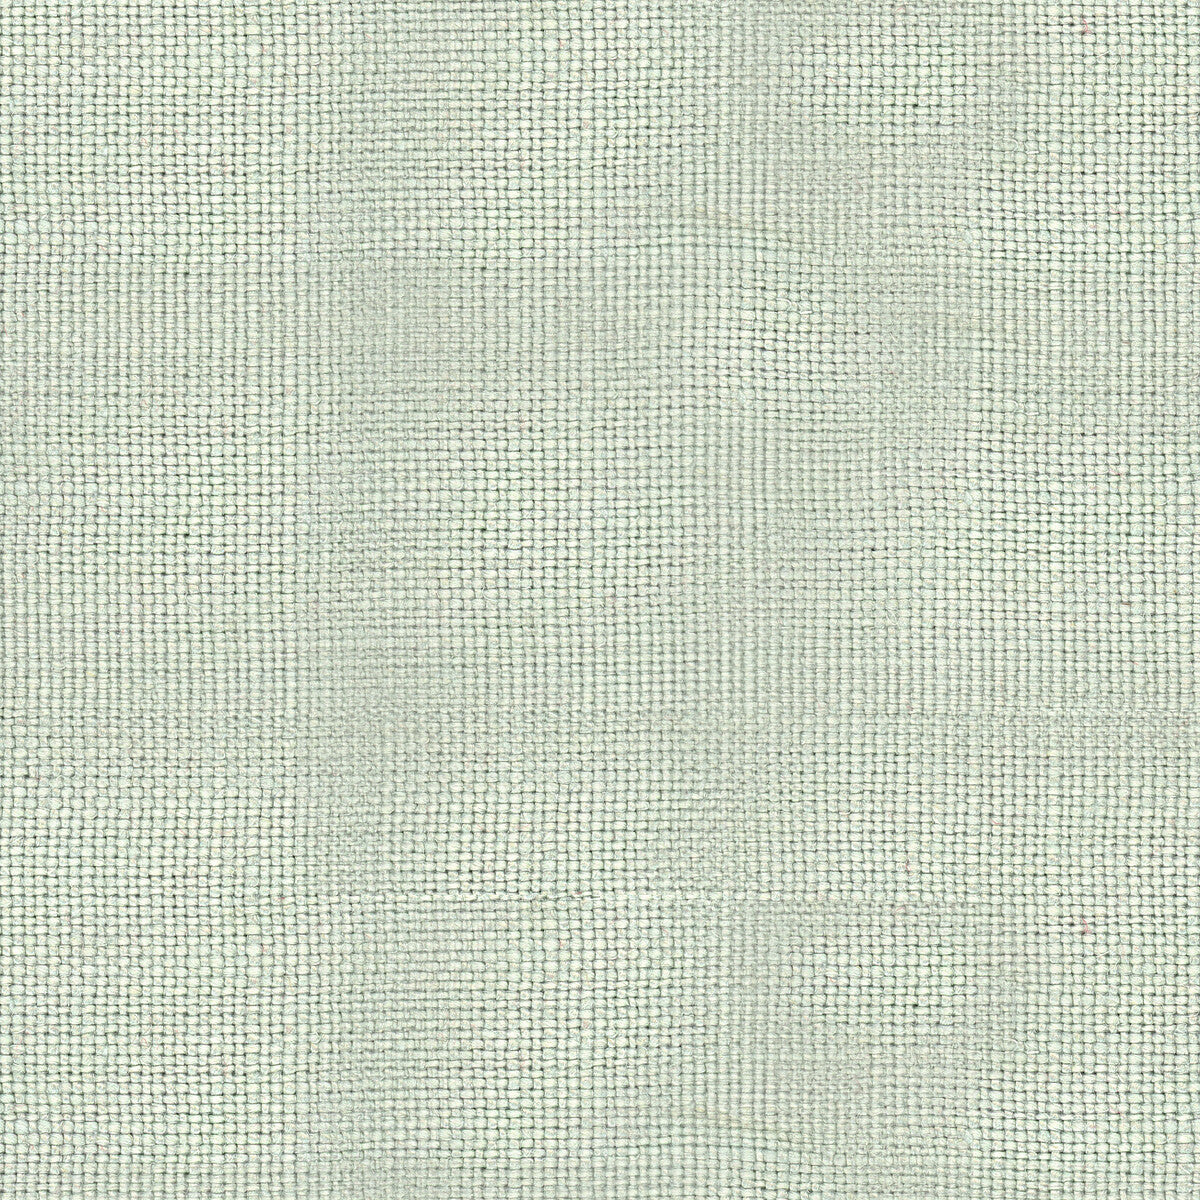 Bankers Linen fabric in celadon color - pattern 8017144.13.0 - by Brunschwig &amp; Fils in the Gis collection